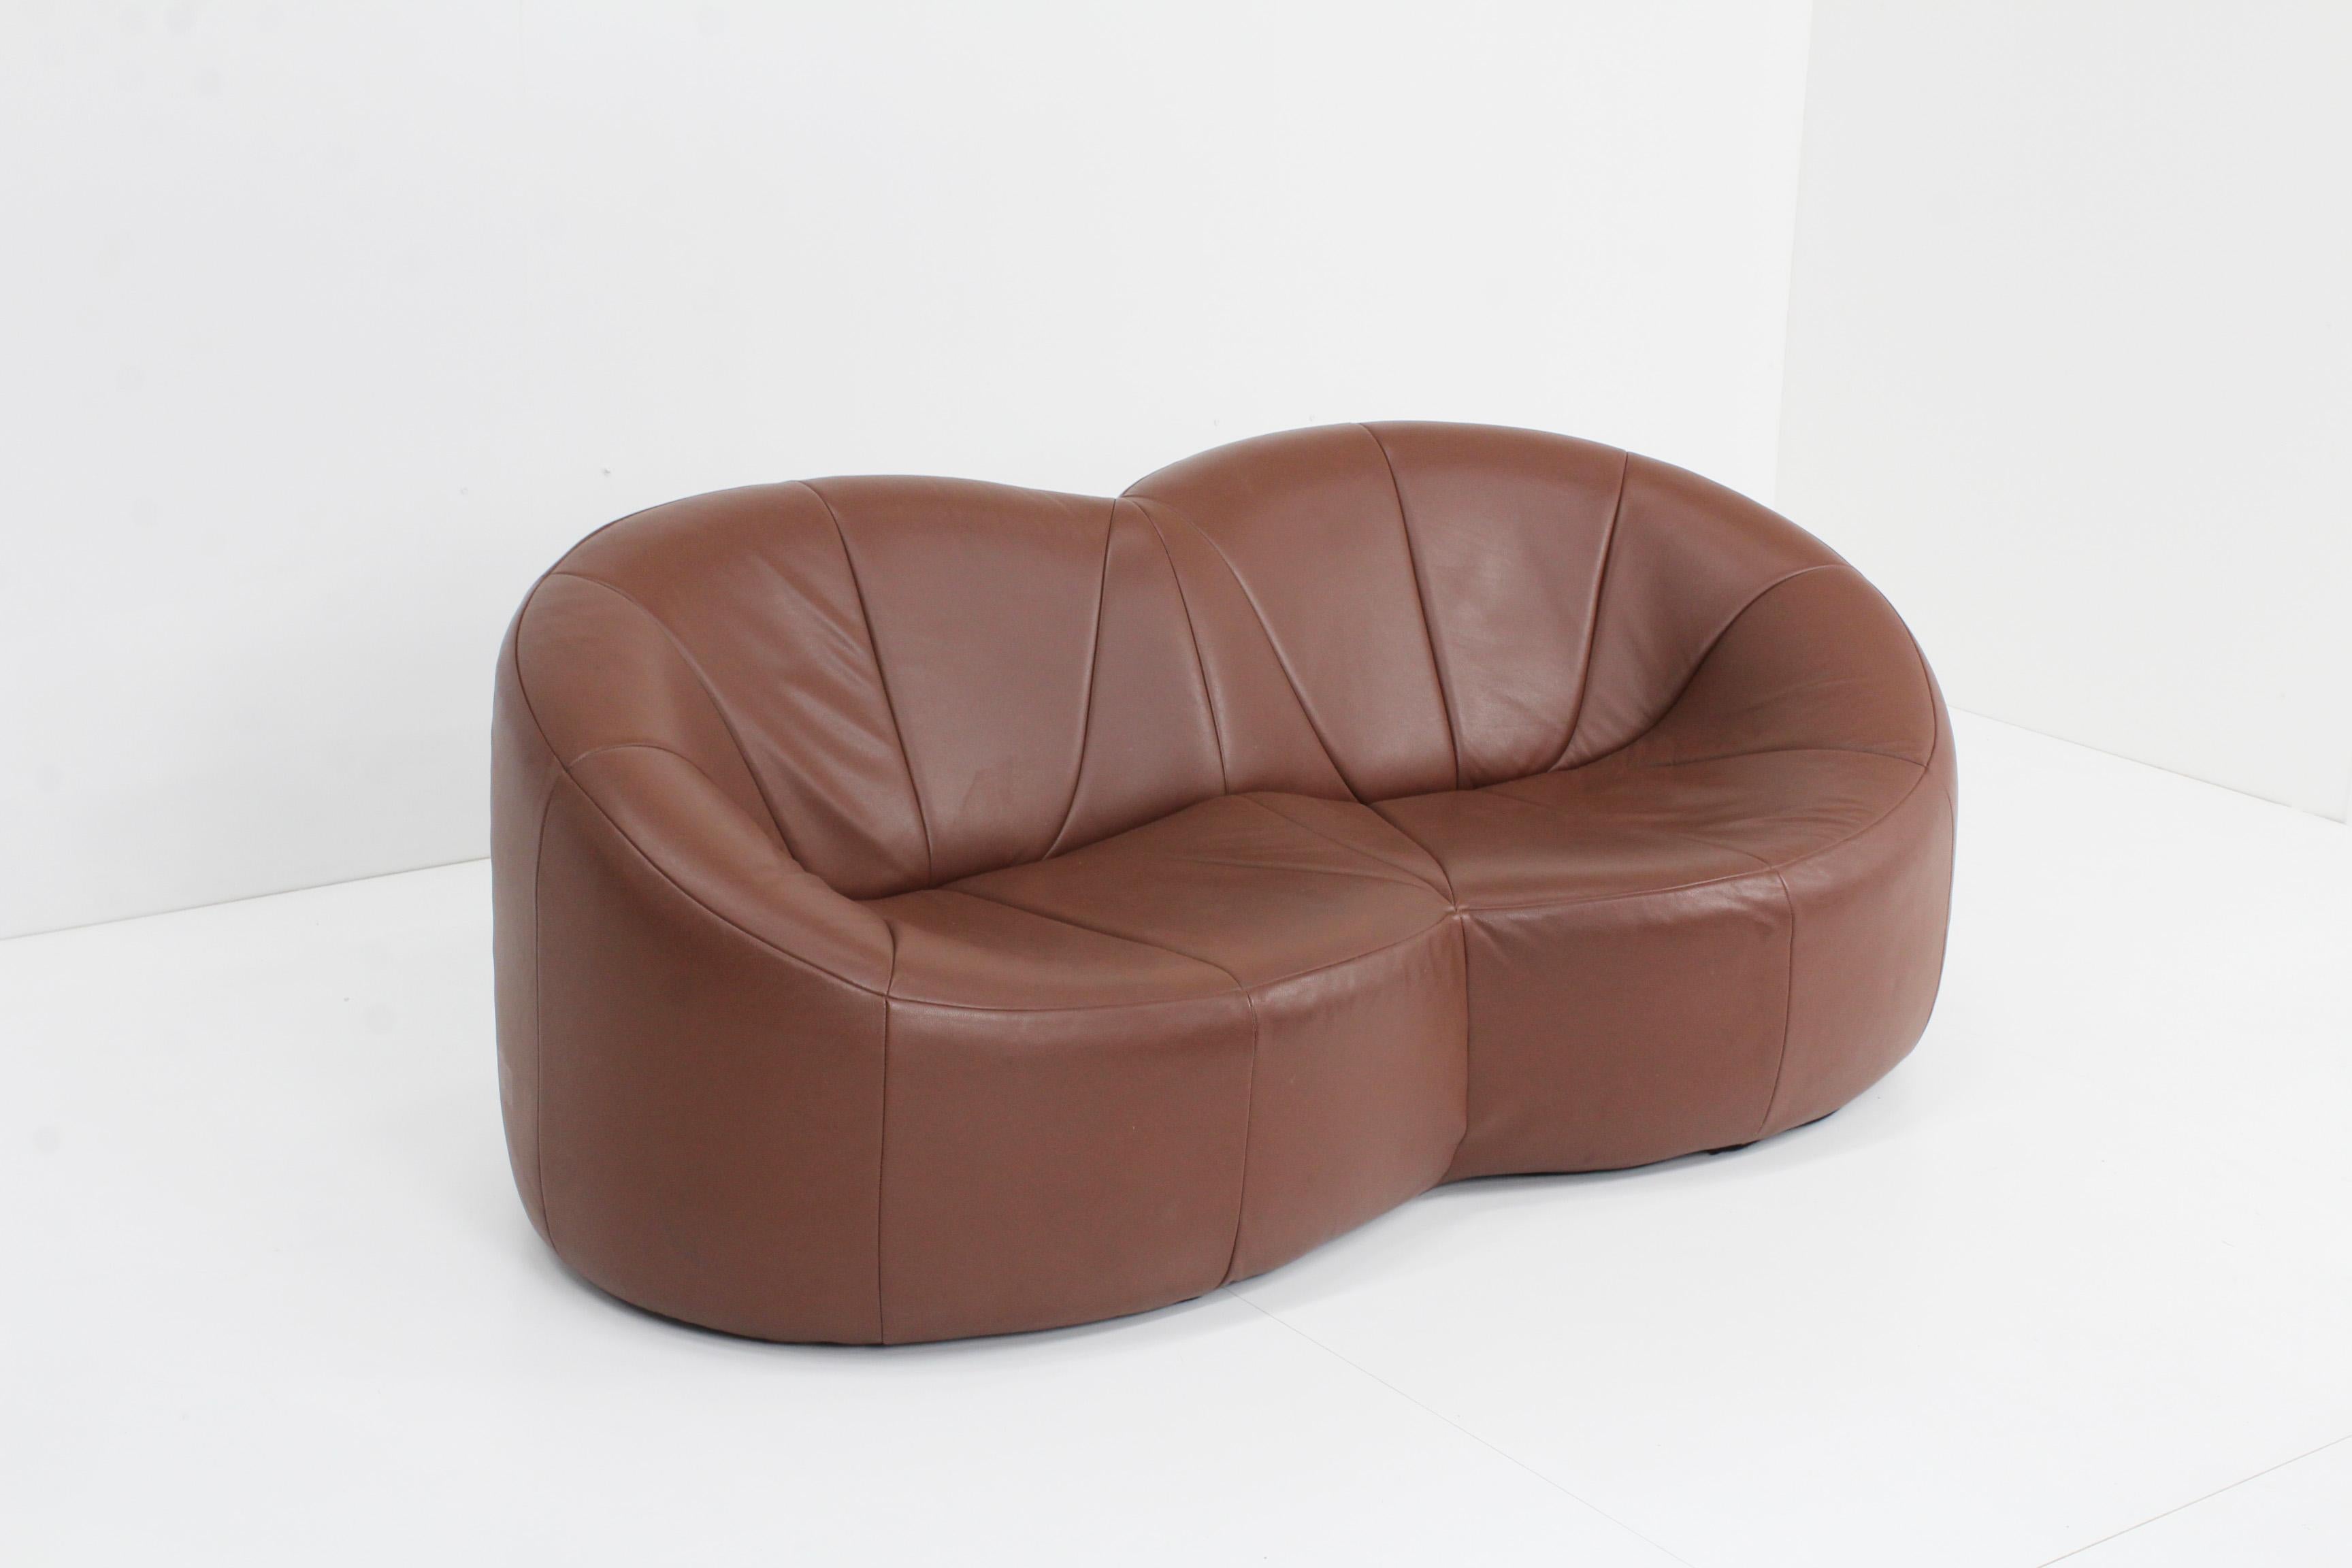 Ligne Roset Pumpkin 2-seater sofa designed by Pierre Paulin for Ligne Roset. In its original brown leather. The leather is in a very good condition with traces of use consistent with age, very minimal. 

The pumpkin collection is known for its